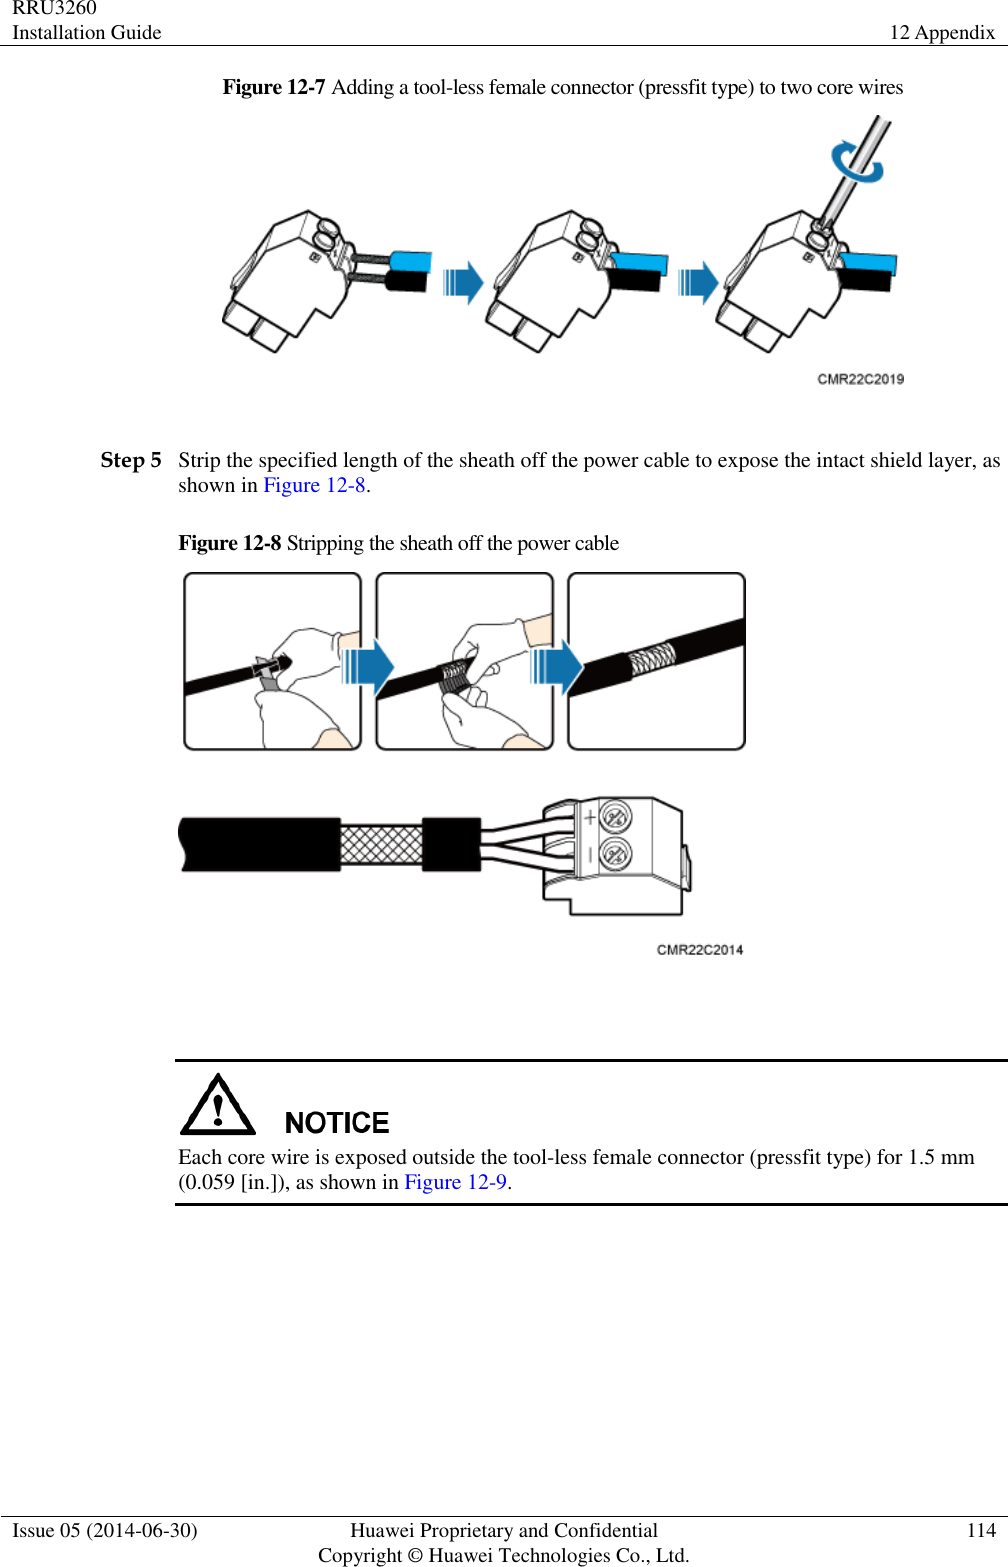 RRU3260 Installation Guide 12 Appendix  Issue 05 (2014-06-30) Huawei Proprietary and Confidential                                     Copyright © Huawei Technologies Co., Ltd. 114  Figure 12-7 Adding a tool-less female connector (pressfit type) to two core wires   Step 5 Strip the specified length of the sheath off the power cable to expose the intact shield layer, as shown in Figure 12-8. Figure 12-8 Stripping the sheath off the power cable     Each core wire is exposed outside the tool-less female connector (pressfit type) for 1.5 mm (0.059 [in.]), as shown in Figure 12-9. 